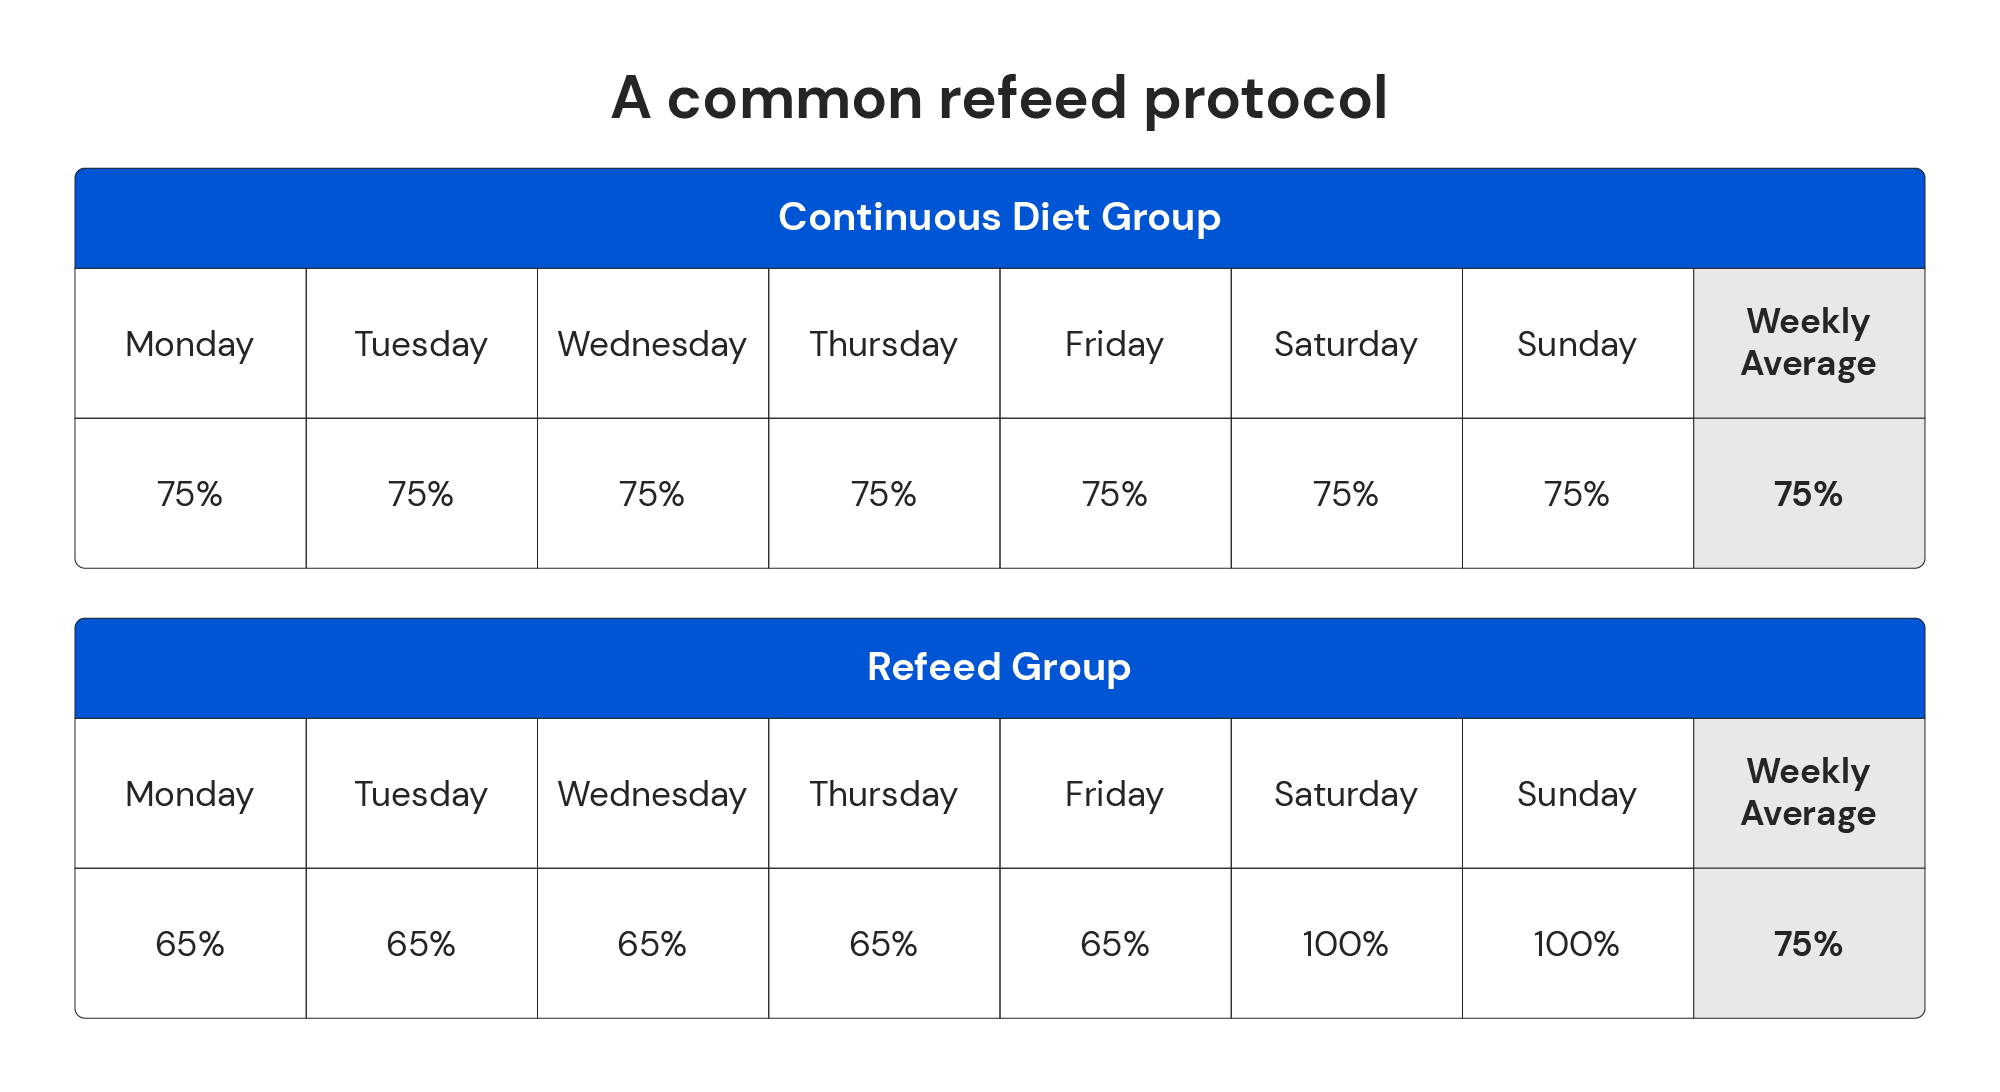 A common refeed protocol